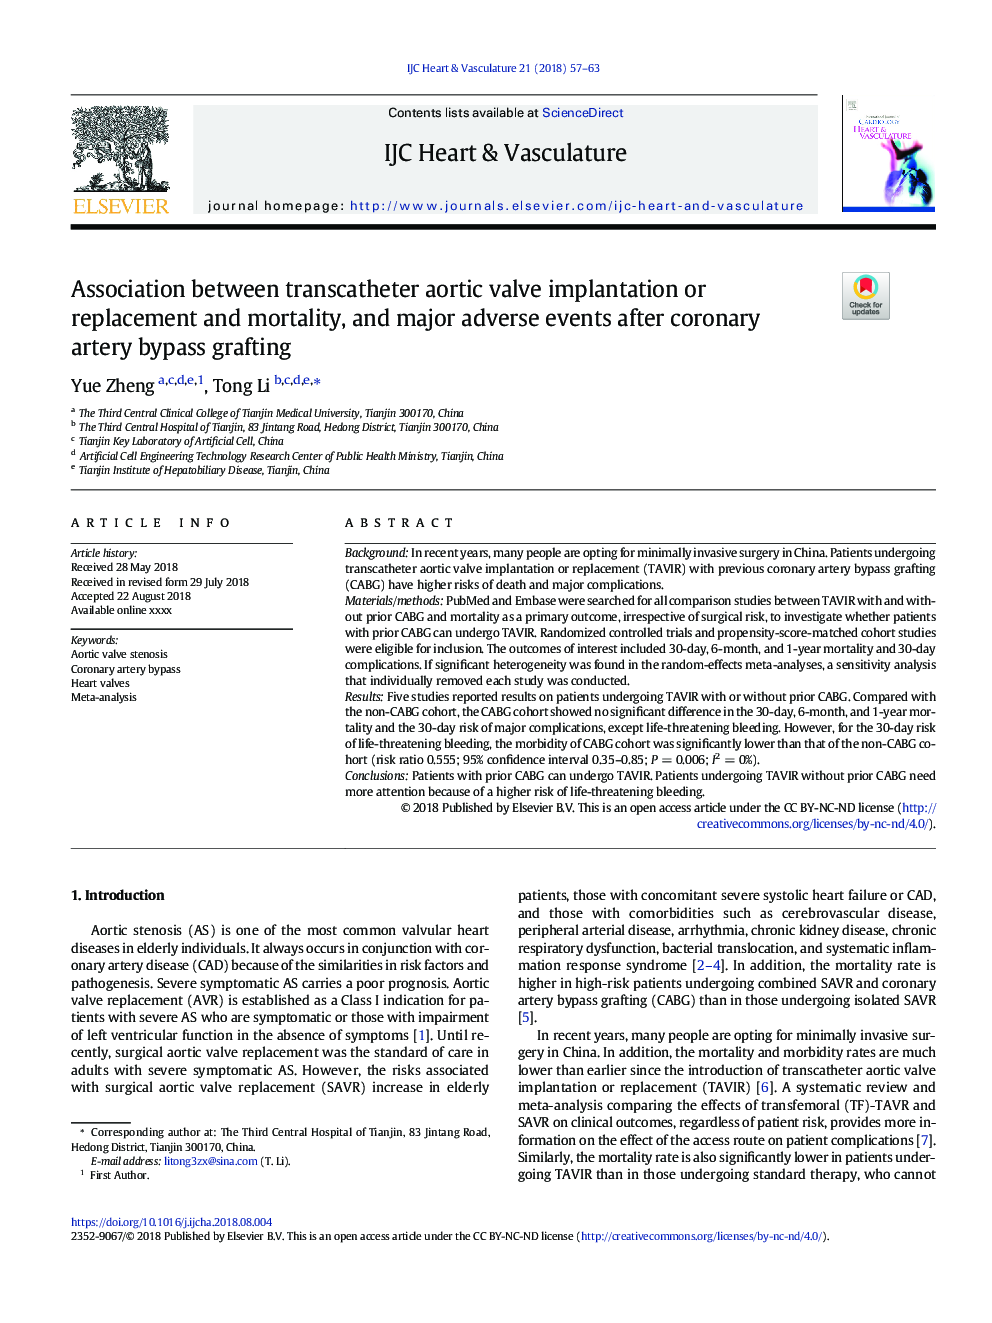 Association between transcatheter aortic valve implantation or replacement and mortality, and major adverse events after coronary artery bypass grafting